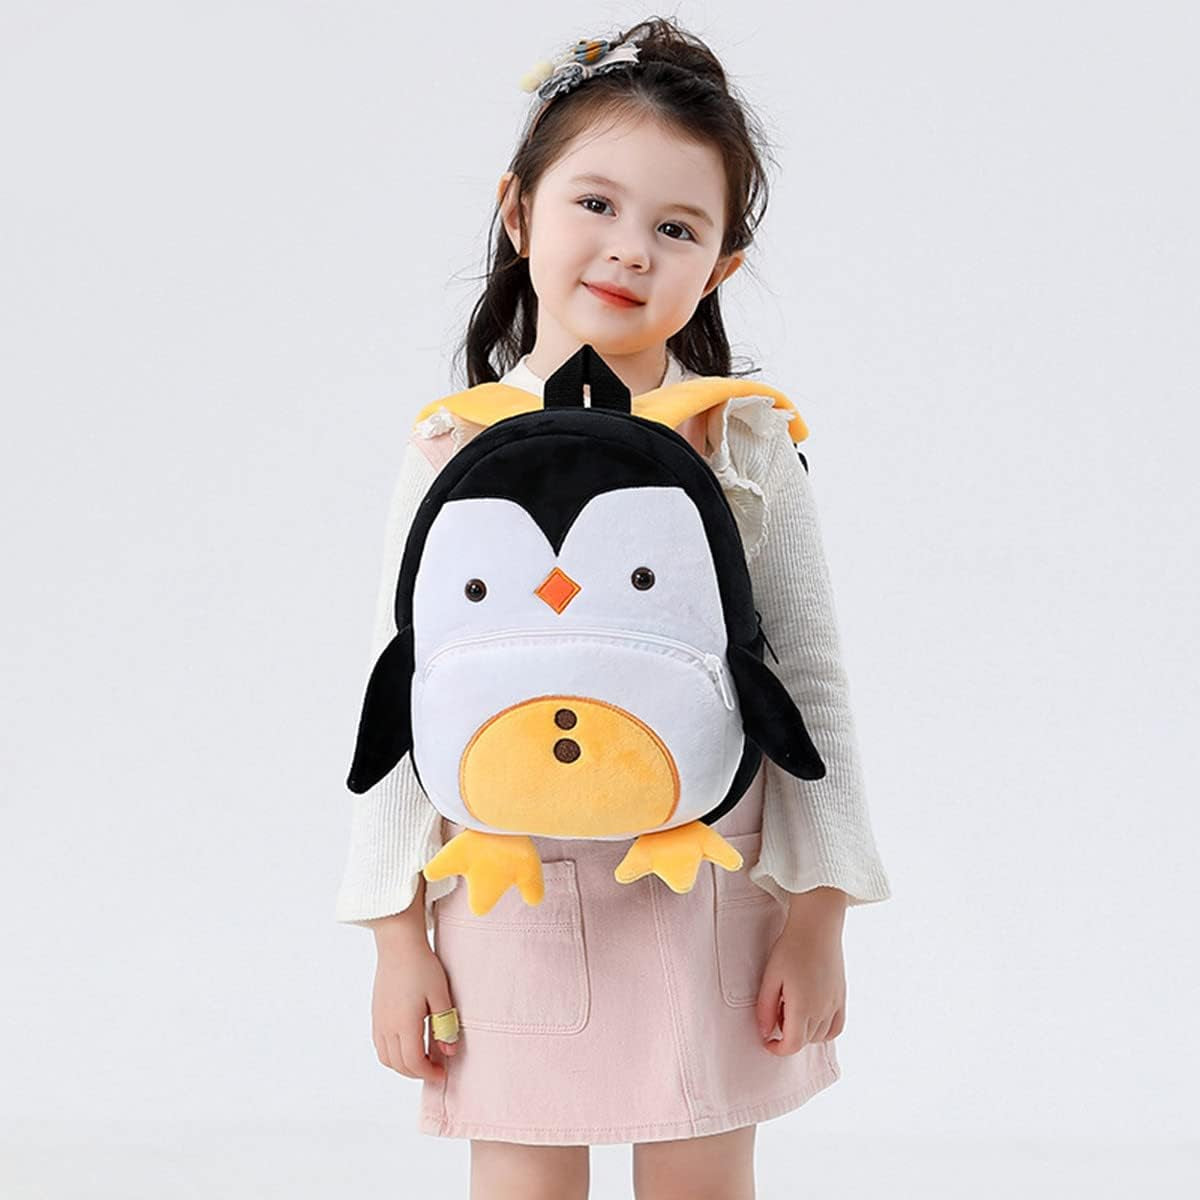 Toddler Backpack for Boys and Girls, Cute Soft Plush Animal Cartoon Mini Backpack Little for Kids 2-6 Years (Elephant)